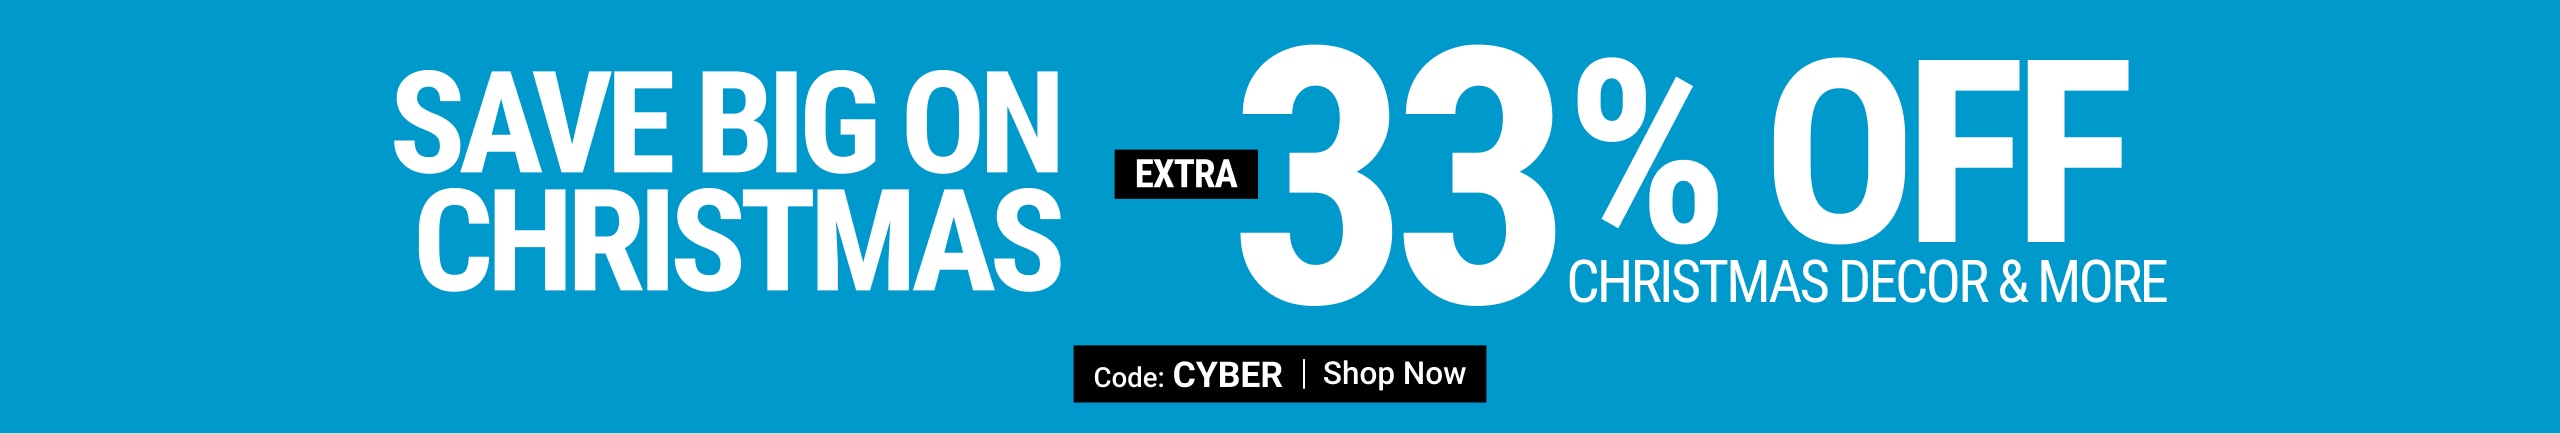 Save big on christmas with extra 33% off - Shop Now